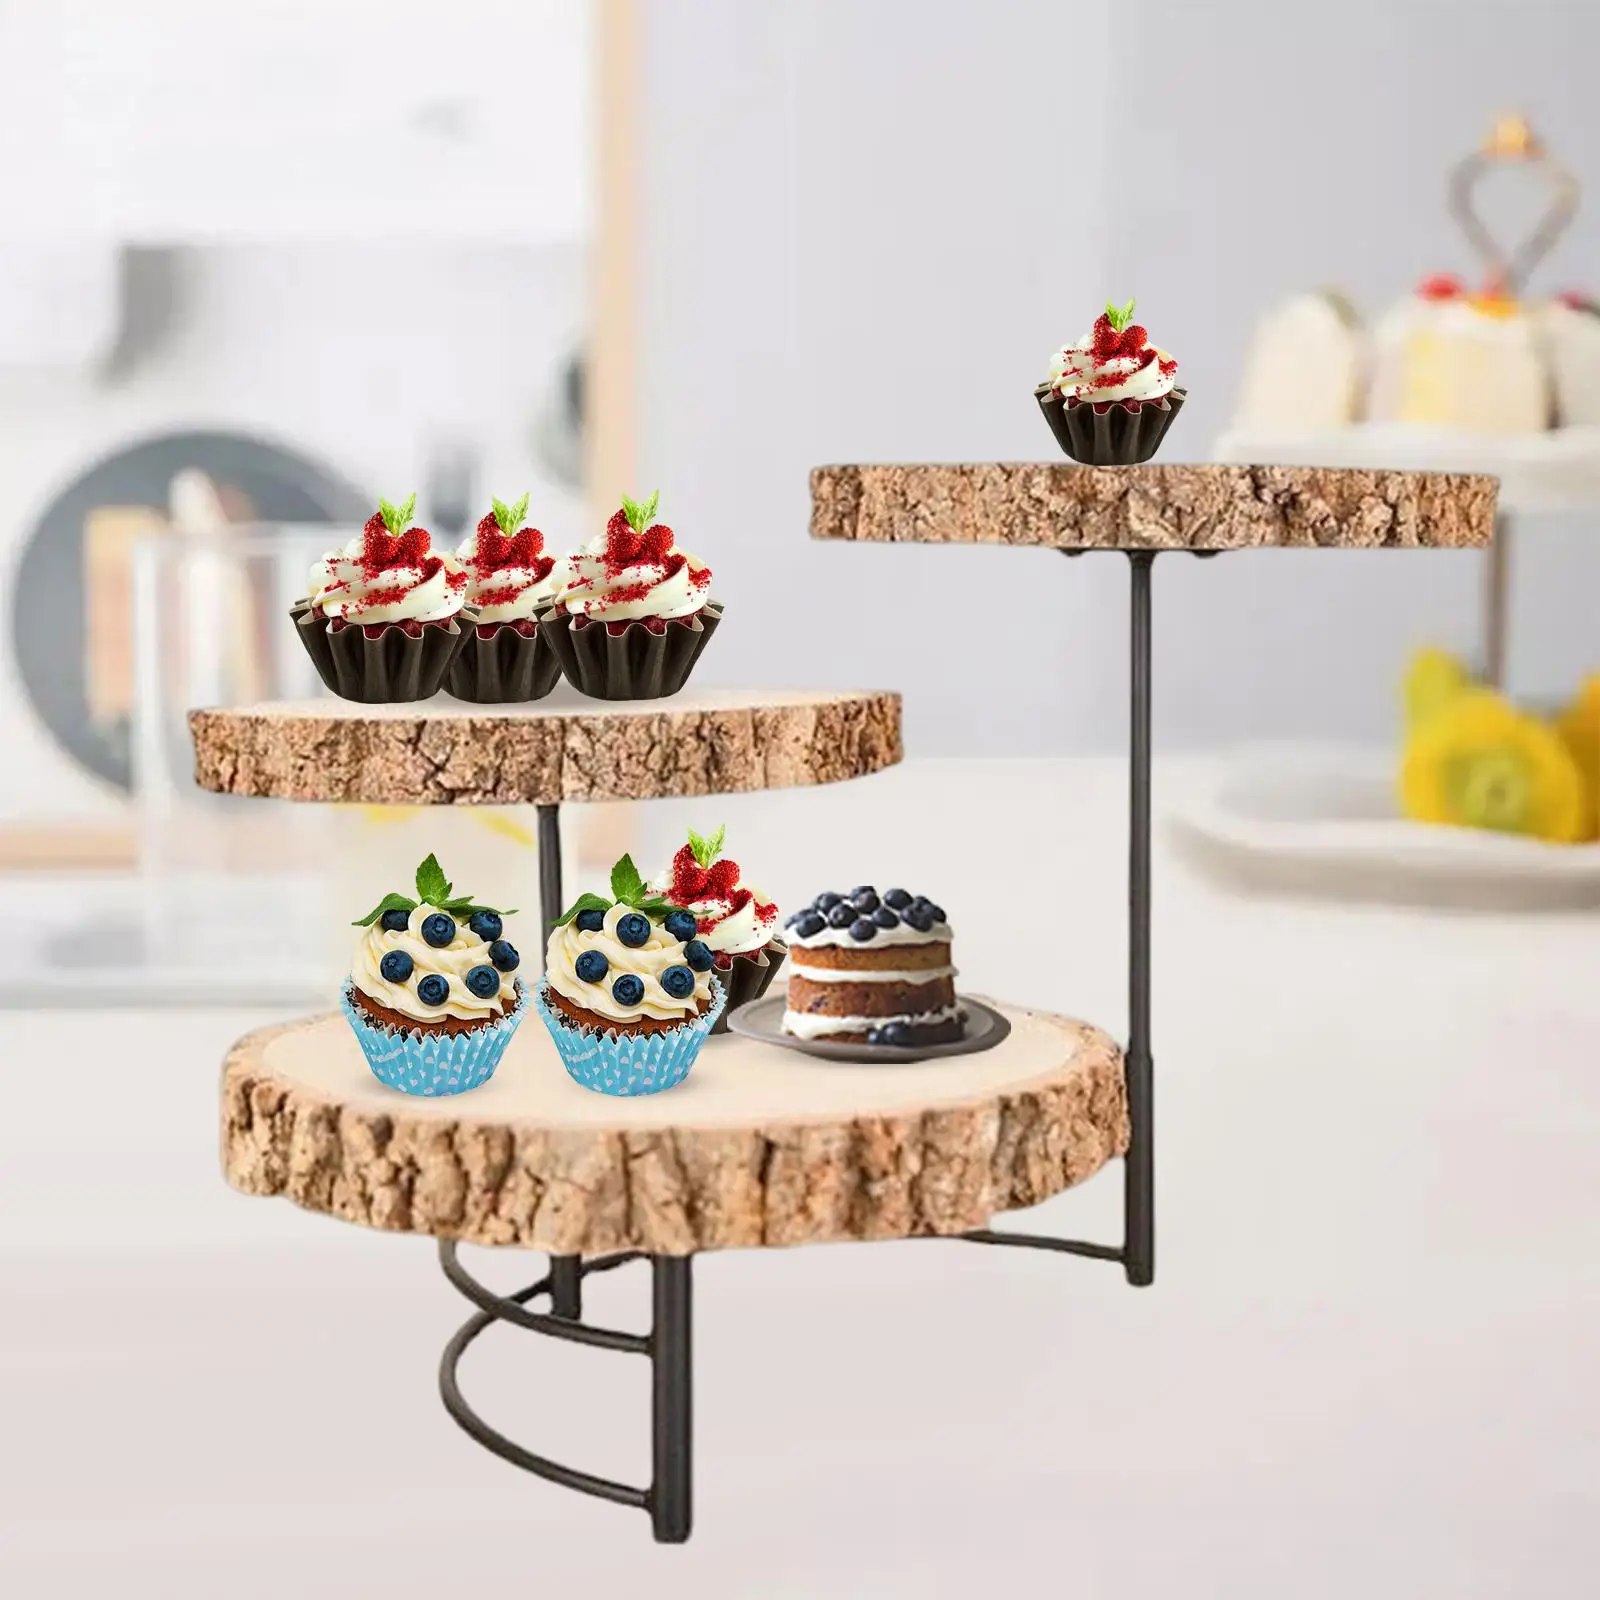 Removable Cupcake Cake Stands 3 Layer Serving Platter Round Cake Pedestal Stand Living Room Party Wedding Entertaining Hotel